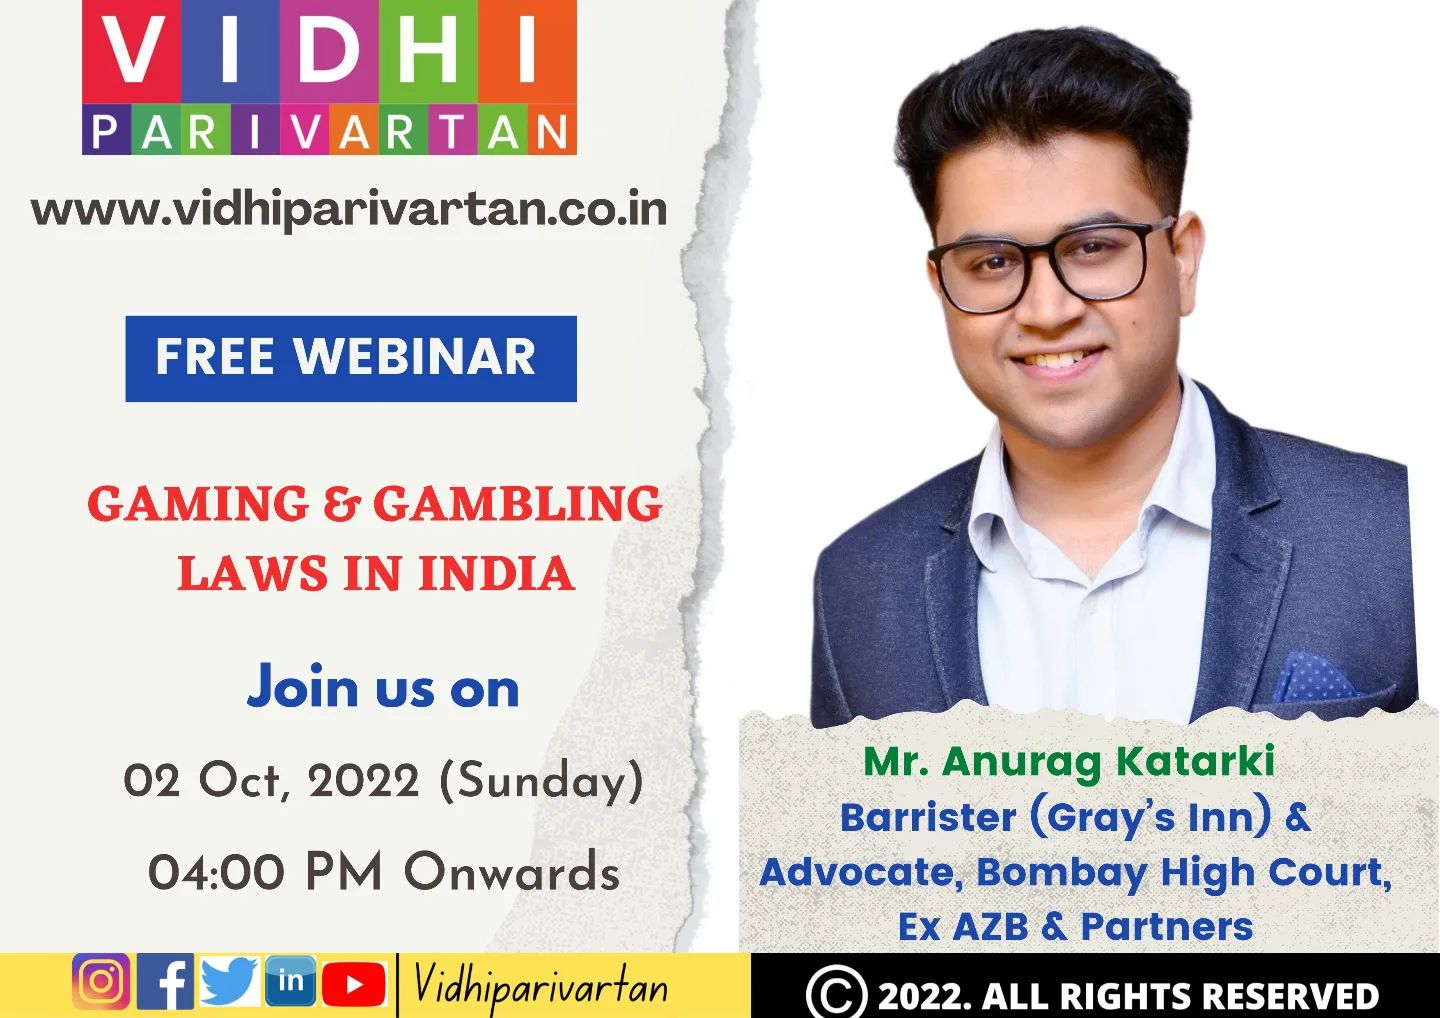 How frequently have you heard of or played "Teen Patti," "Rummy," "Poker," or other games of a similar nature? Assuming 80% of people gamble for entertainment, what will happen to the other 20% who may be caught and lose everything they have? 

Do you have a thorough understanding of gaming and gambling laws? This webinar session is for you if the response is NO.

The webinar aims to study the main concepts and structure of Indian gaming and gambling regulations, explain how they are enforced, and provide comprehensive, career-oriented knowledge for acquiring competence in this area. 

For more information and link to registration form, click on this link - https://vidhiparivartan.co.in/event/vidhi-parivartans-webinar-on-gaming-and-gambling-laws-in-india/

Guest Speaker - Anurag Katarki 

 #career #webinar #people #gaming #entertainment #gambling #laws #india #register